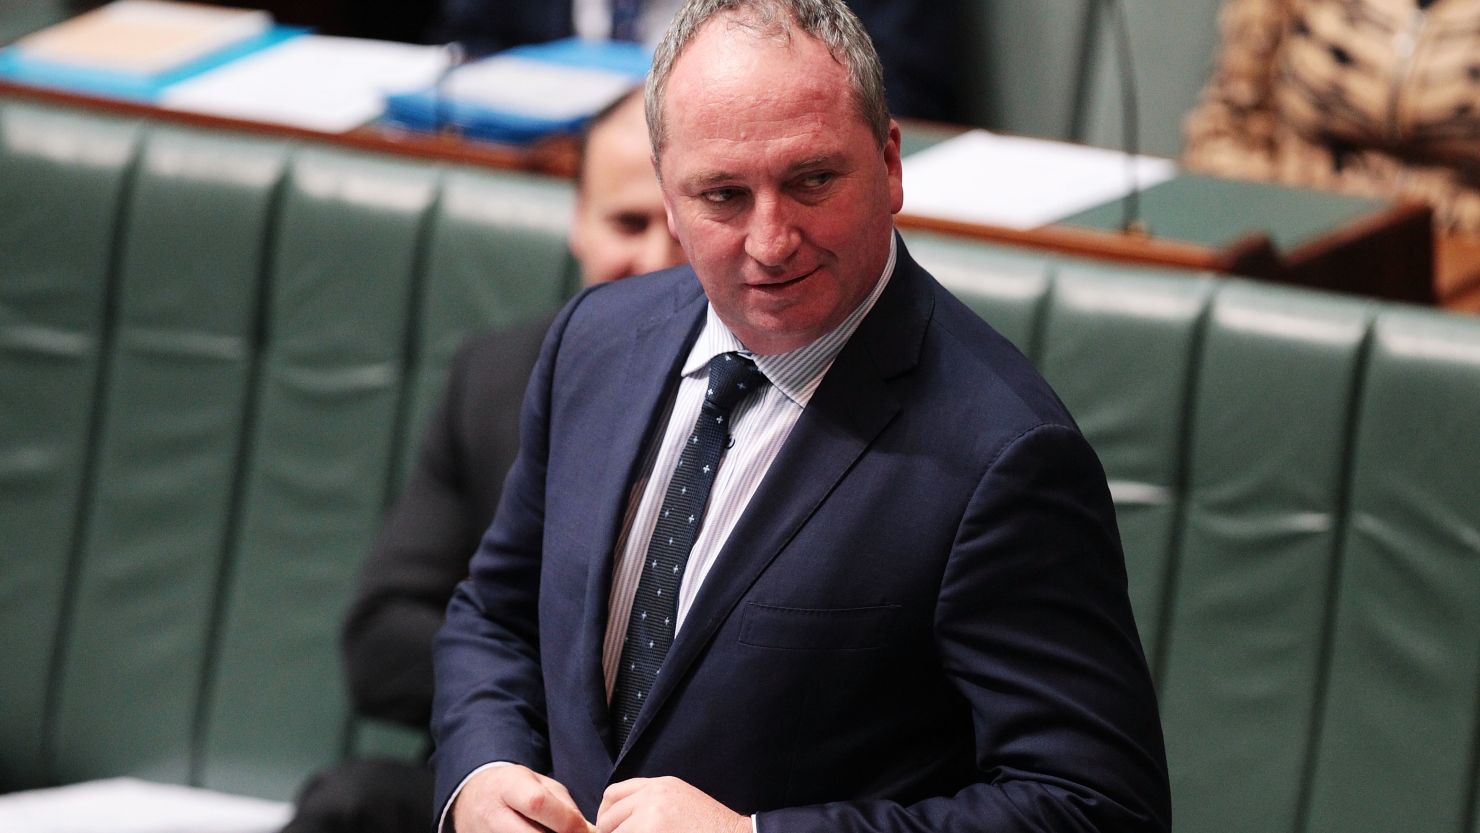 Deputy Prime Minister Barnaby Joyce during House of Representatives question time at Parliament House on October 25, 2017 in Canberra, Australia.